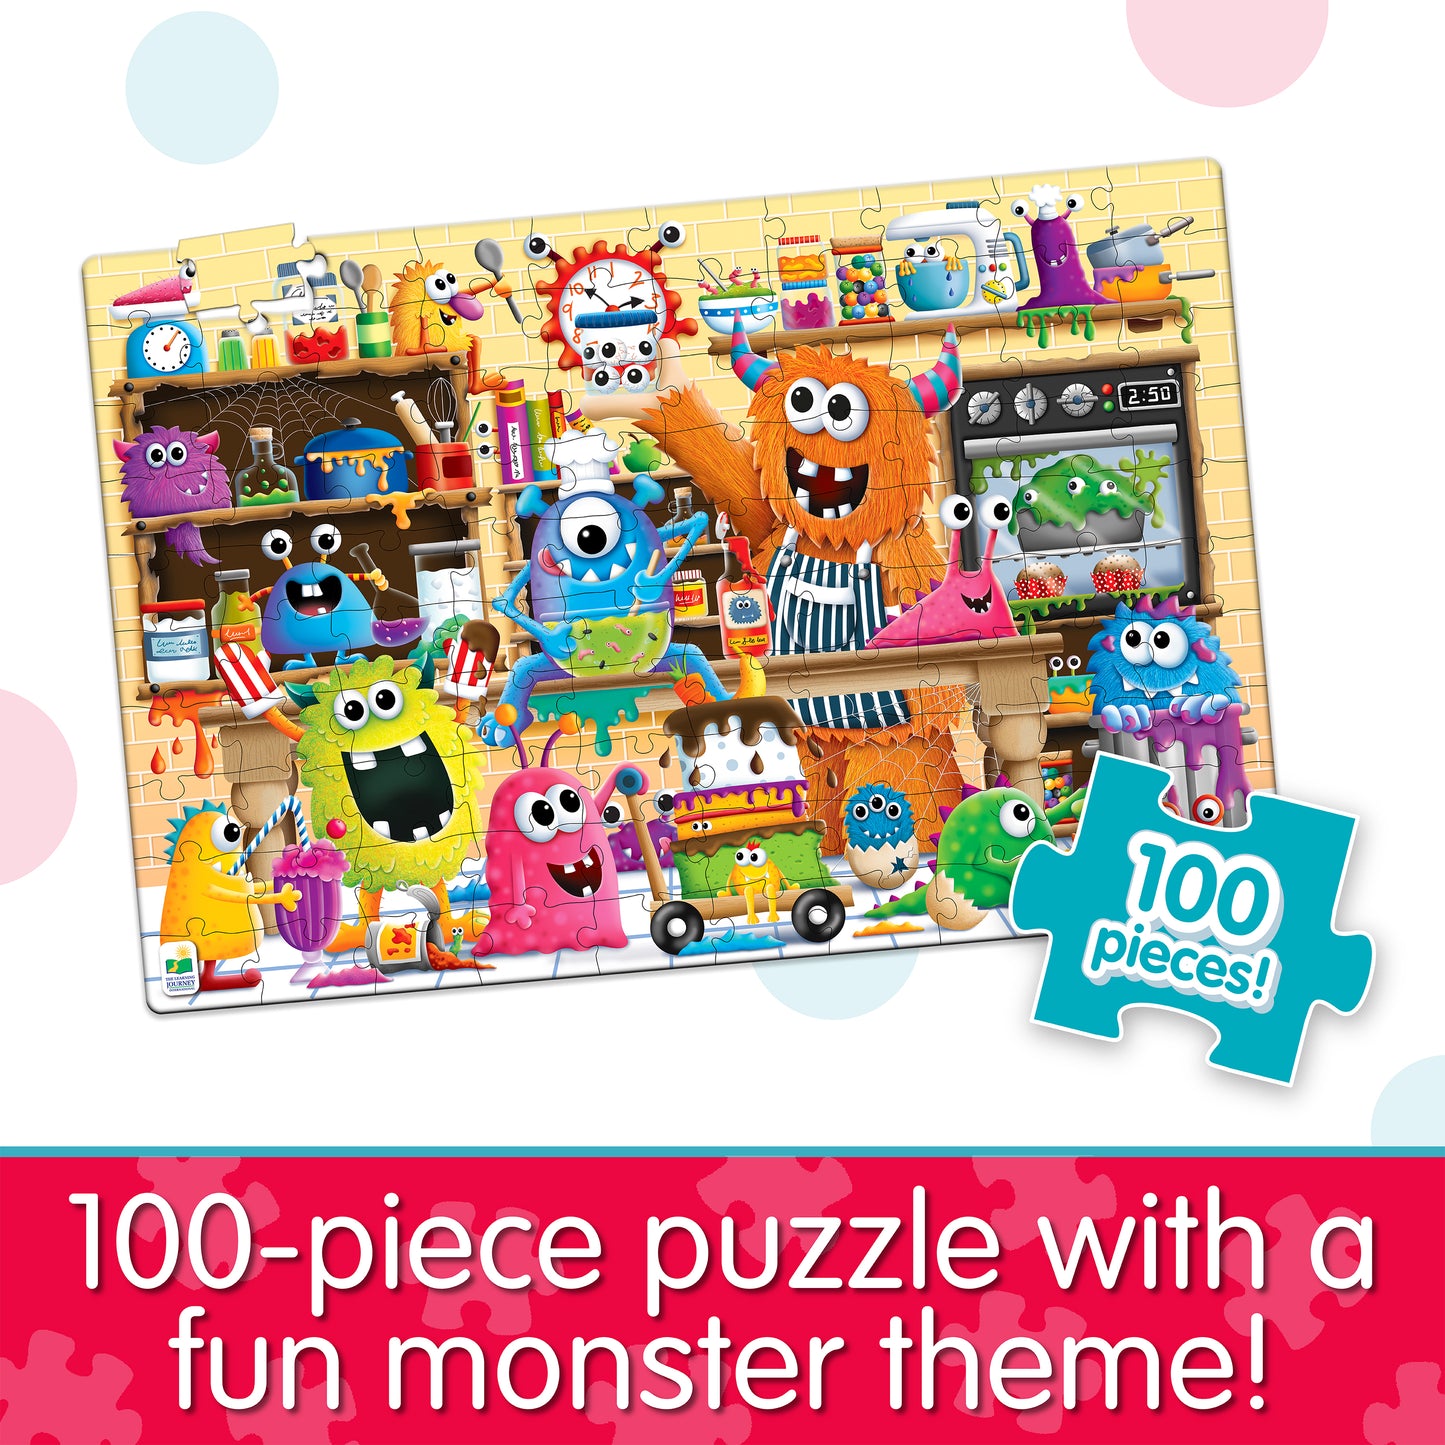 Infographic about Glow in the Dark - Monsters that says, "100-piece puzzle with a fun monster theme!"